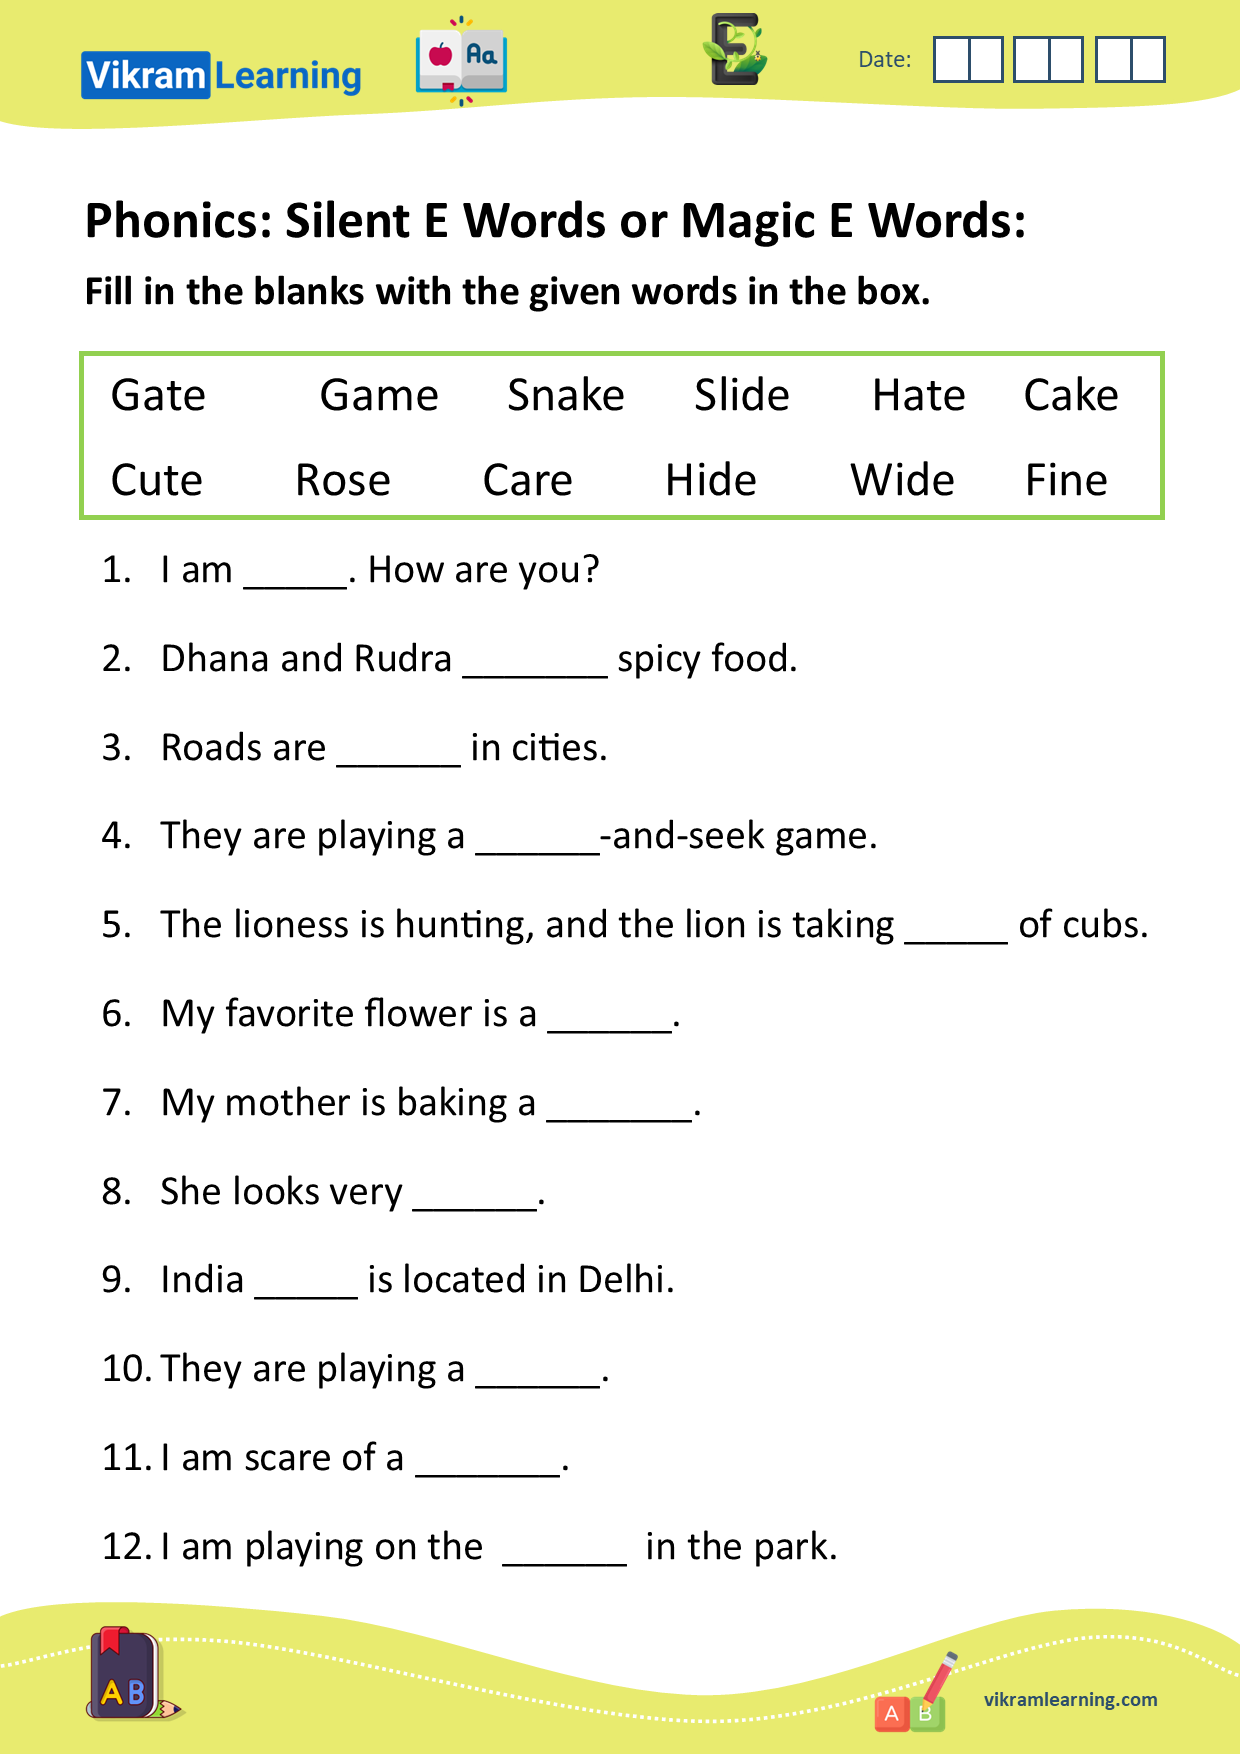 Download phonics silent e words or magic e words worksheets